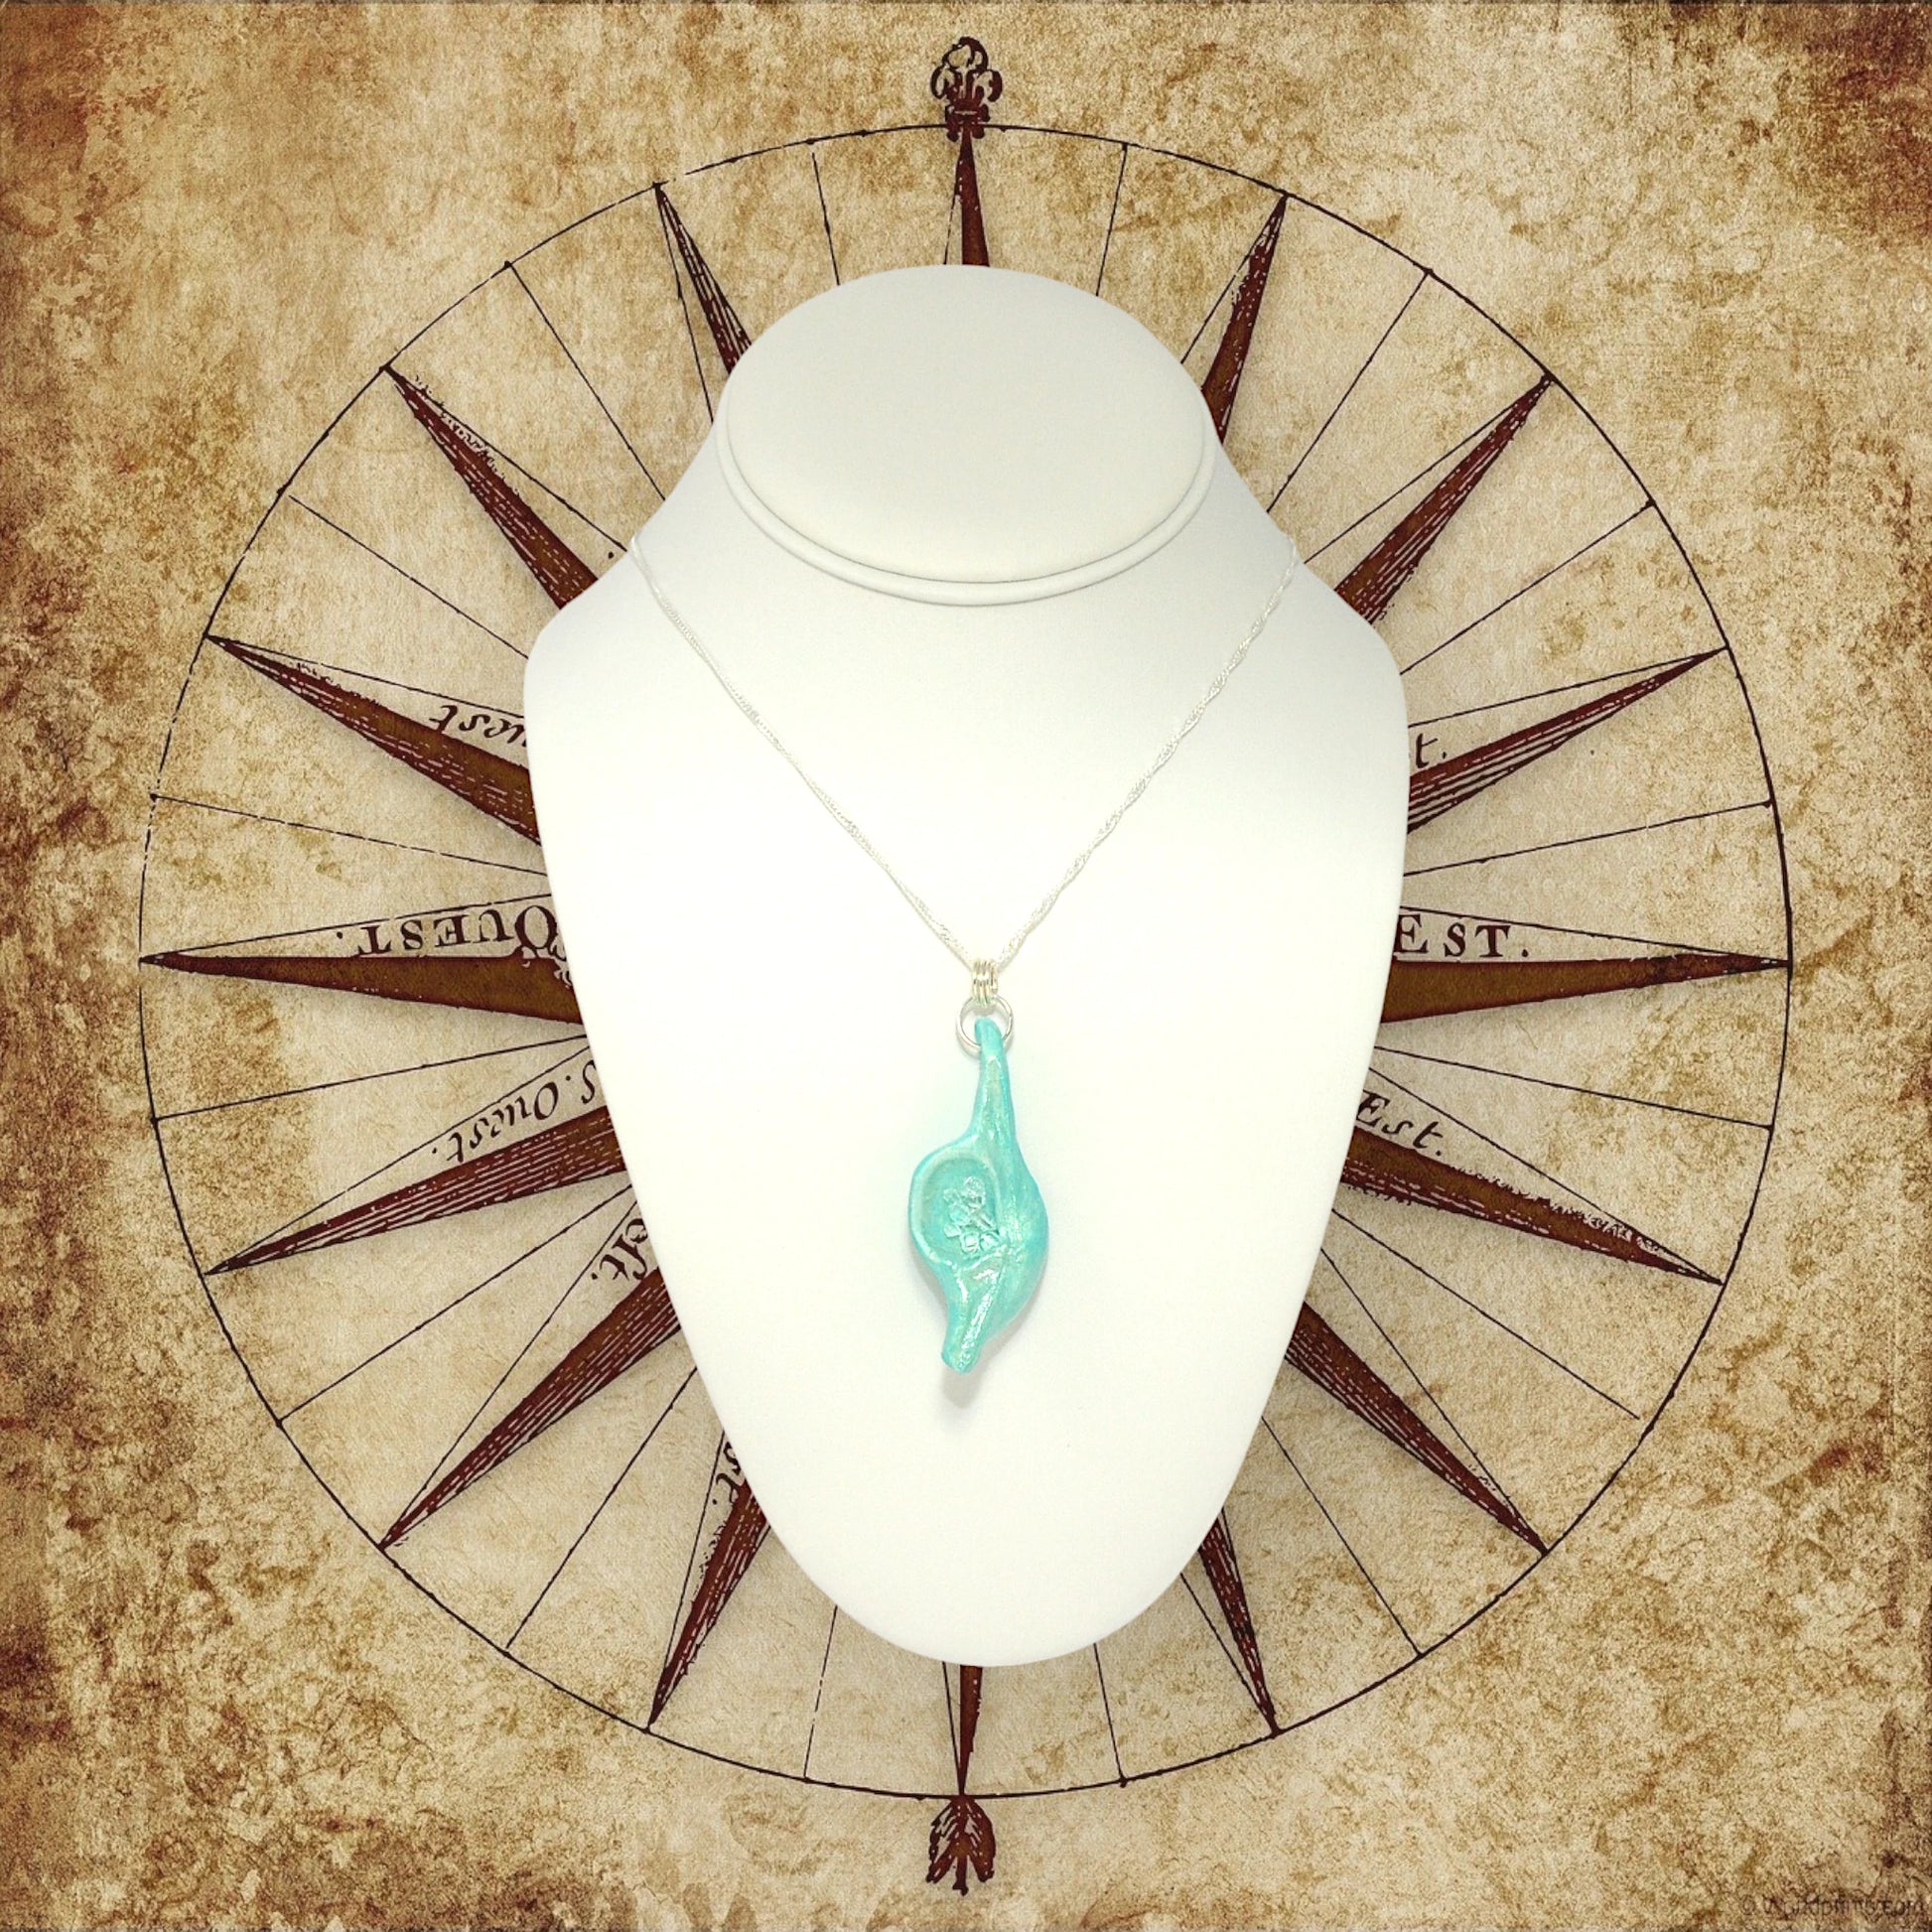 Diamond Mine Pendant is named for the eight herkimer diamonds that enhance the beauty of this gorgeous pendant! The pendant is shown hanging on a white necklace displayer with an old world map in the background.